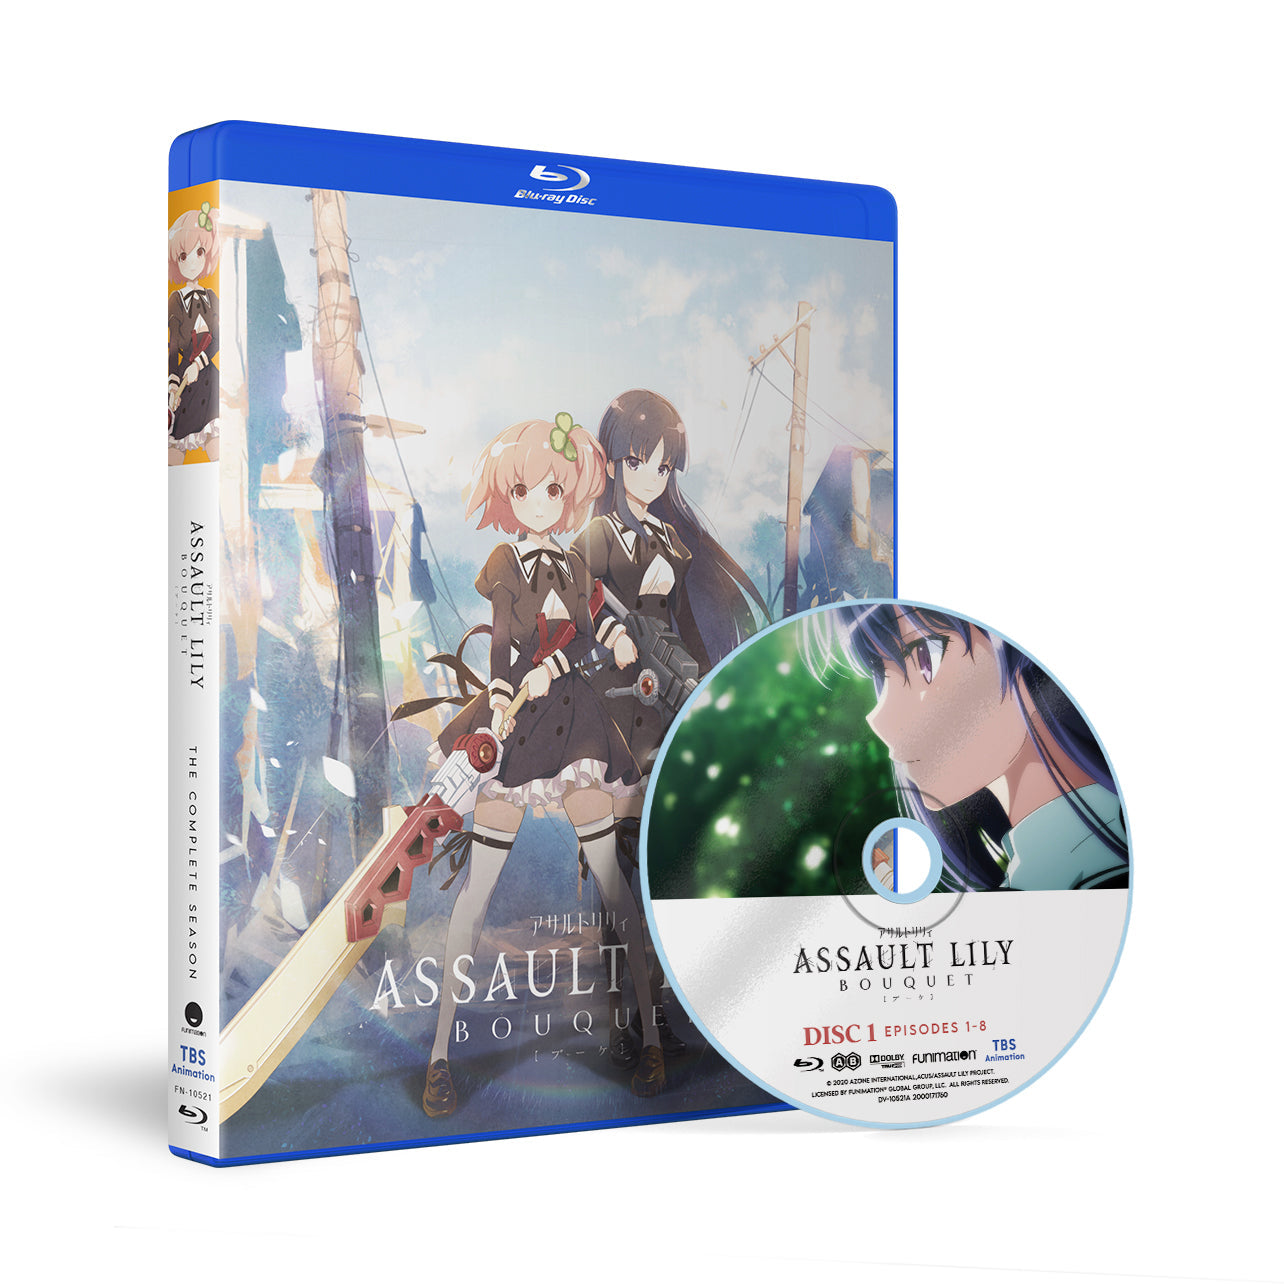 Assault Lily: Bouquet - The Complete Season - Blu-ray image count 1